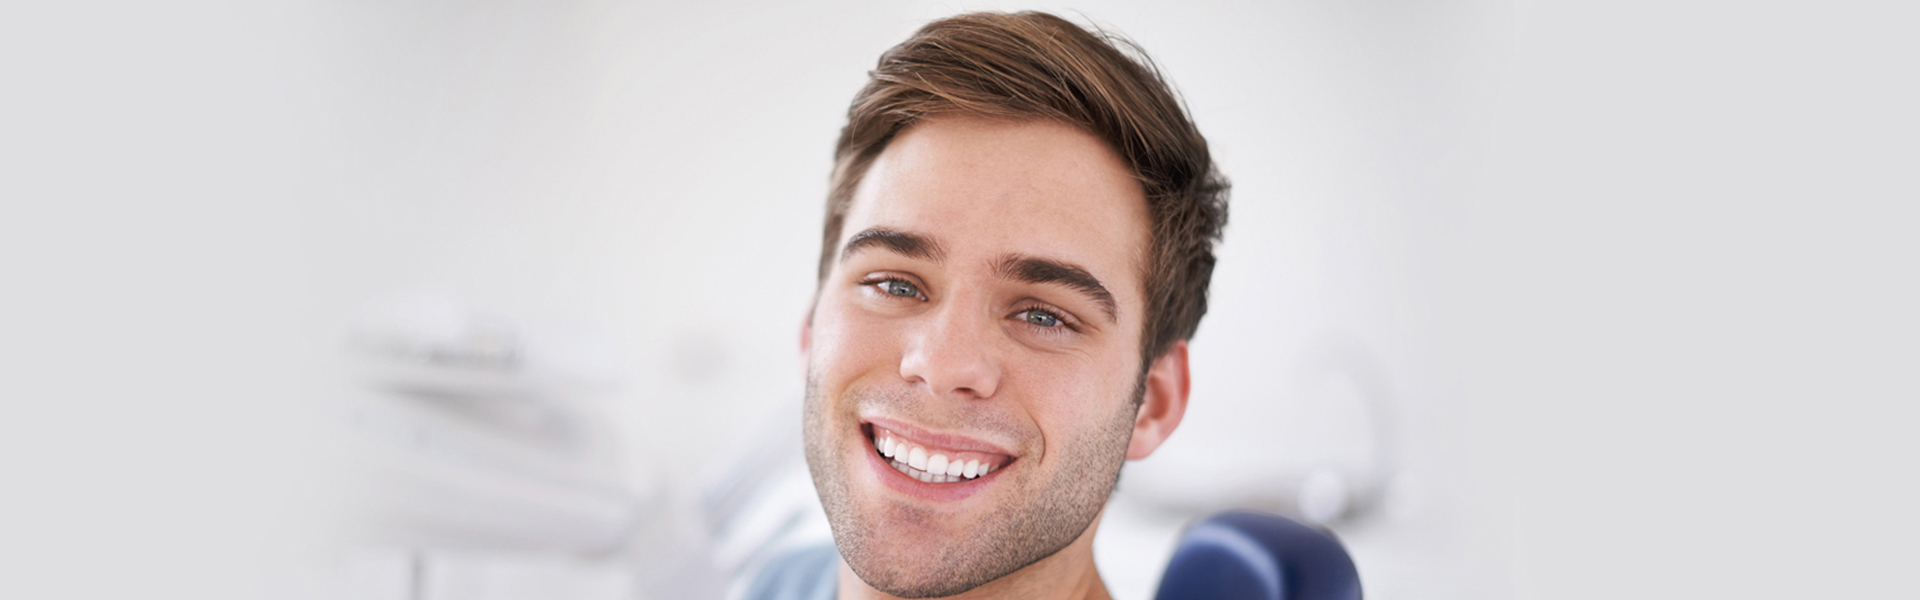 Inlays and Onlays: The Solution You Need for Damaged Teeth